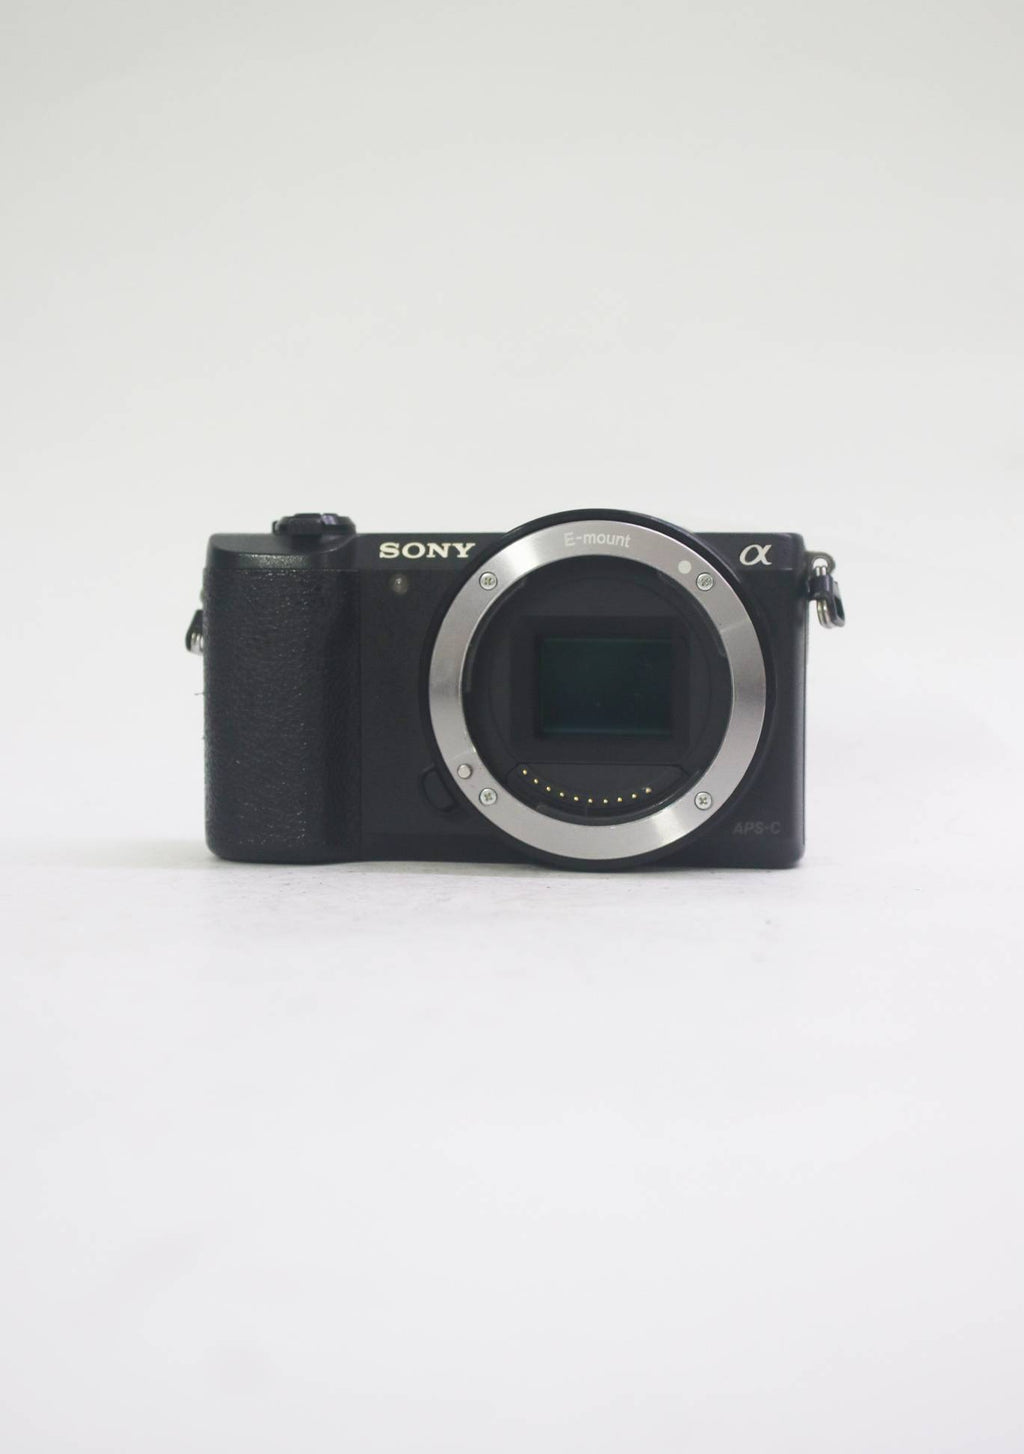 Used Sony A5100 with E 55-210mm F4.5-6.3 Telephoto Lens